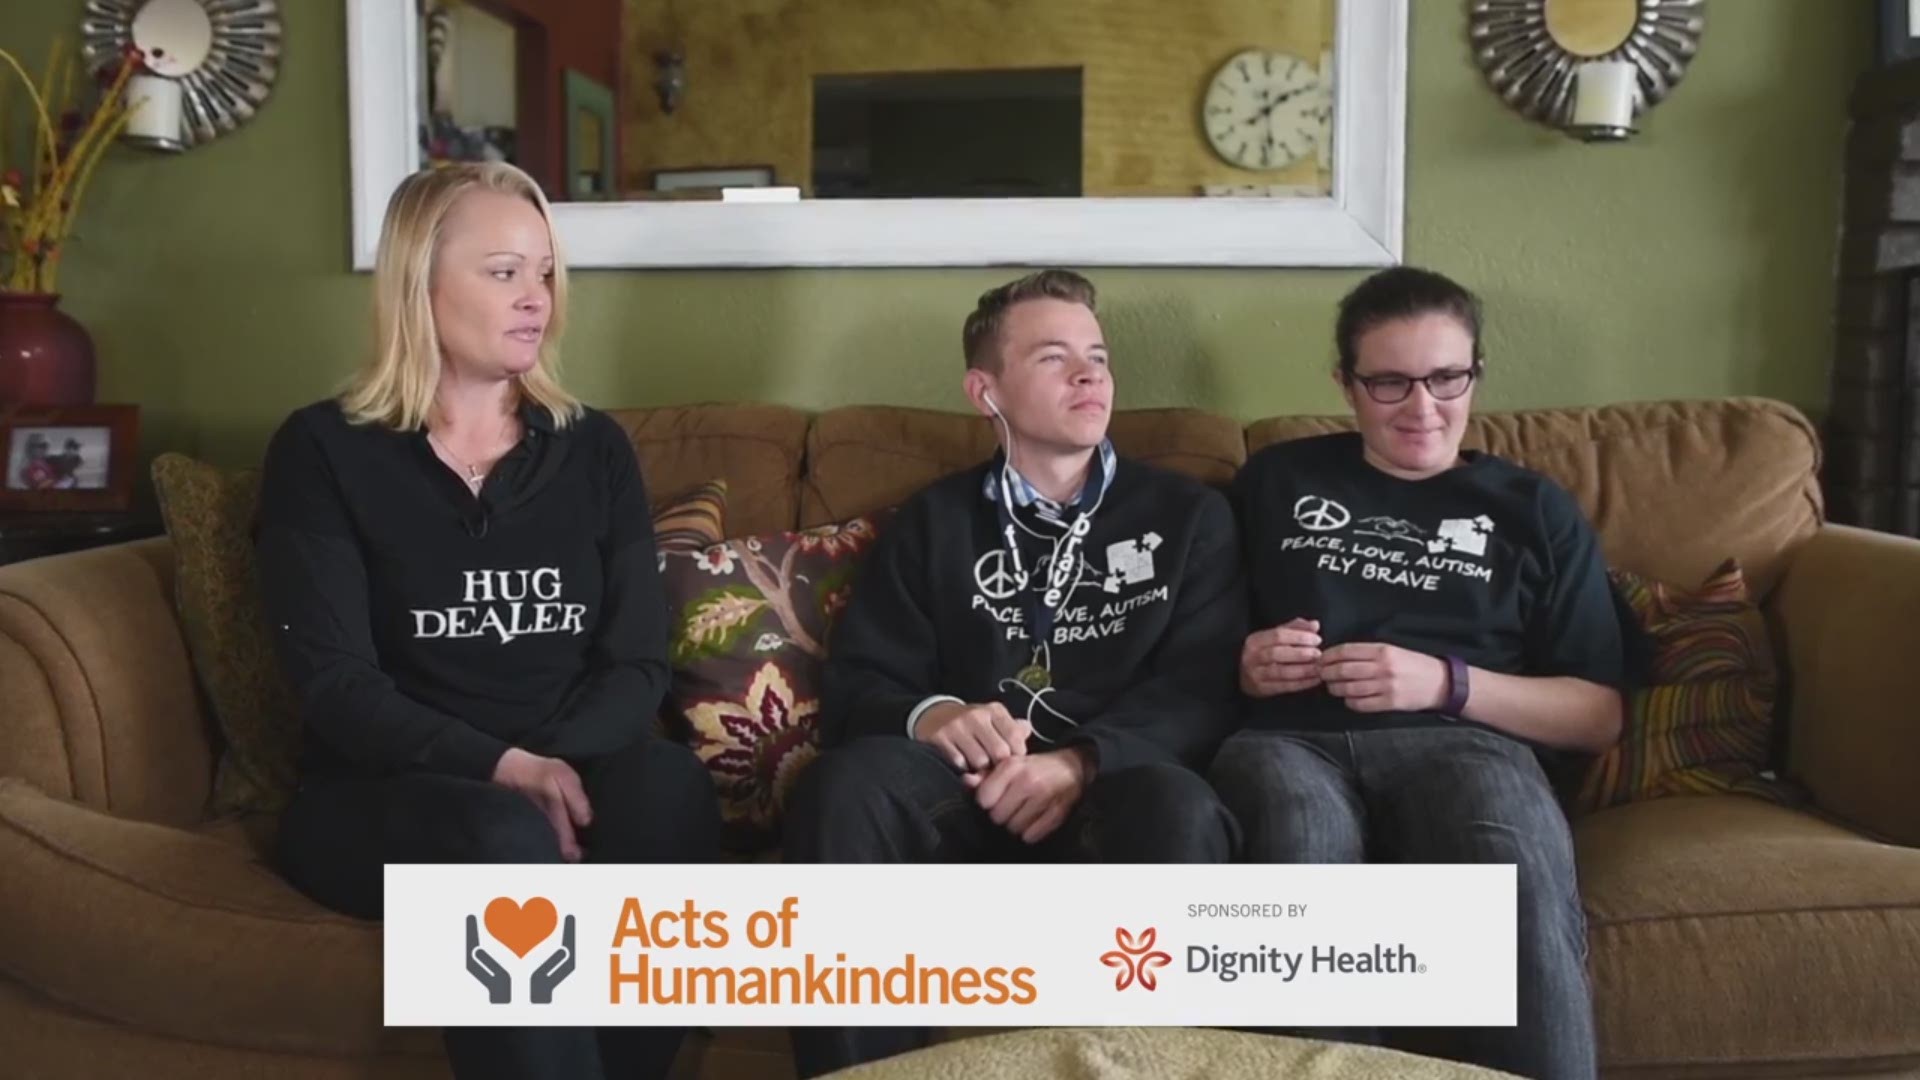 Acts of Humankindness is sponsored by Dignity Health